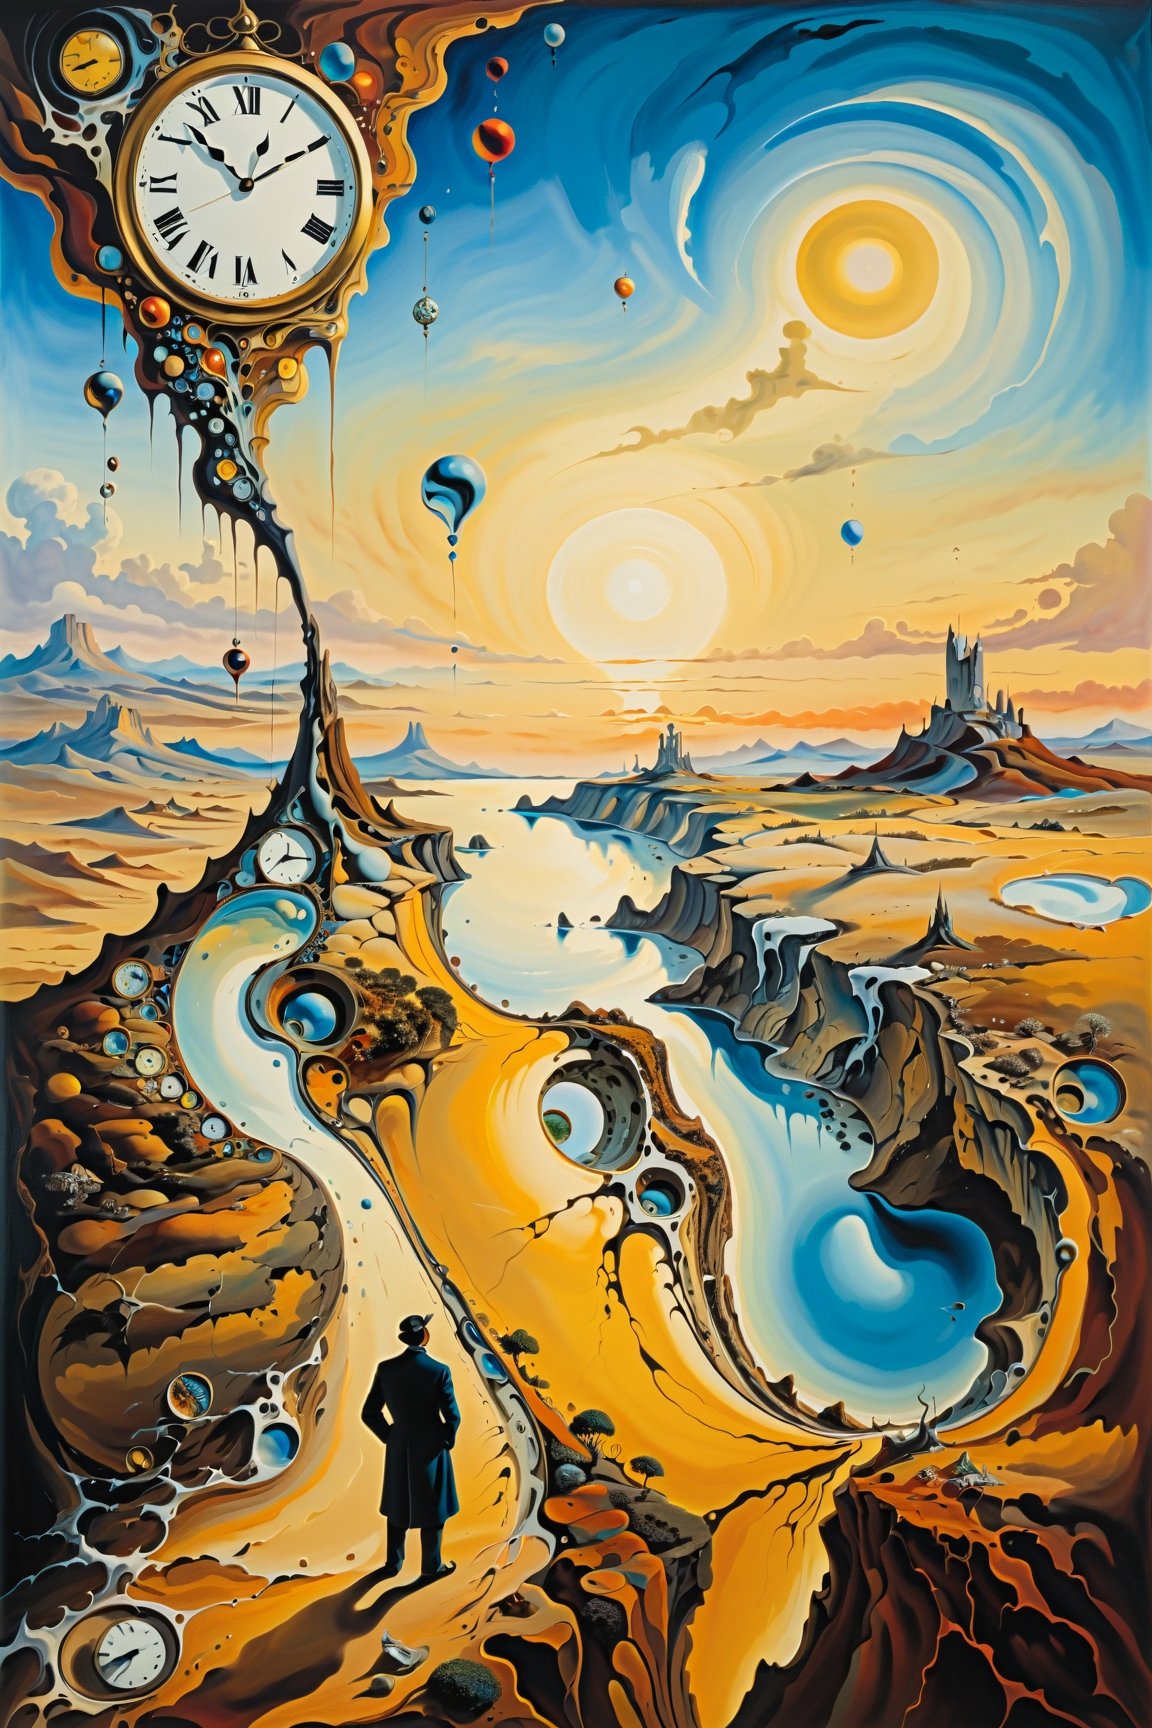 (Masterpiece), (Best Quality), (Ultra-detailed), Artistic painting, (Inspired by Salvador Dali's surrealist art), create a landscape with melting clocks, distorted figures, and a backdrop of swirling colors and shapes. The overall mood should be dreamlike and otherworldly. In the foreground, a man stands gazing out at the strange and wonderful scenery around him. His expression is one of fascination and curiosity, as if he's exploring a new world for the first time